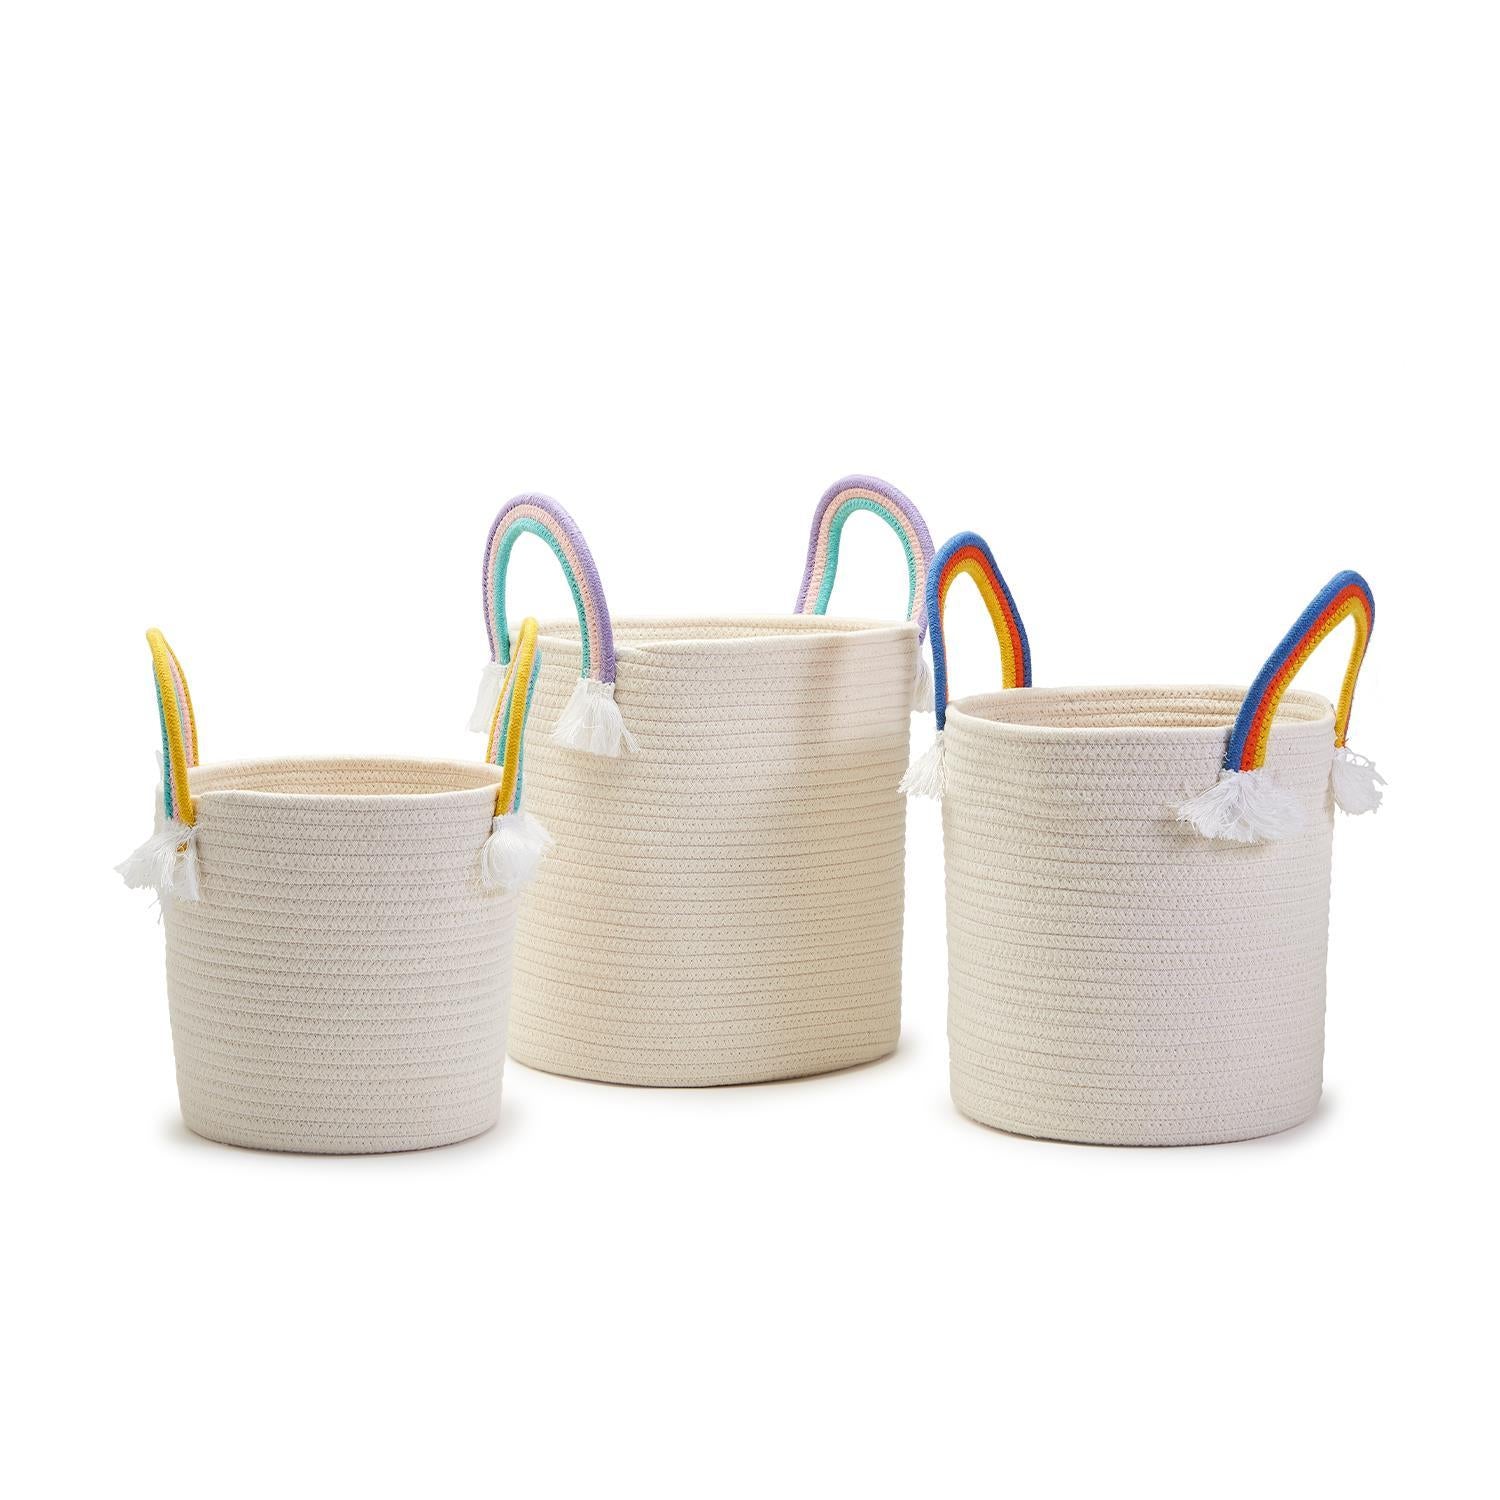 Haven & Co- Rainbow Handle Rope Baskets